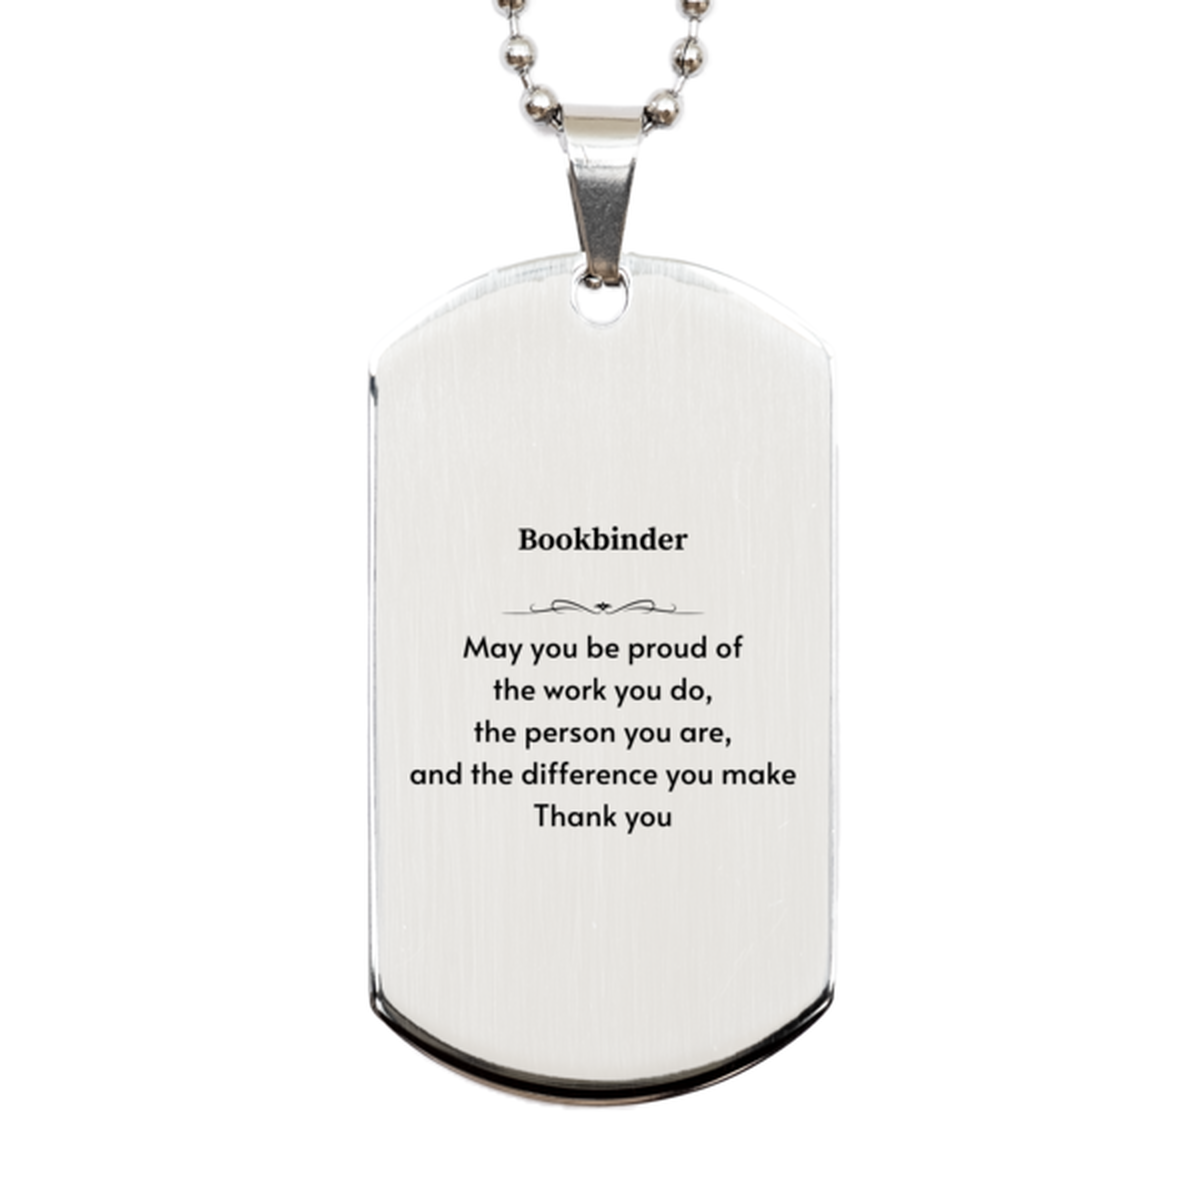 Heartwarming Silver Dog Tag Retirement Coworkers Gifts for Bookbinder, Bookbinder May You be proud of the work you do, the person you are Gifts for Boss Men Women Friends